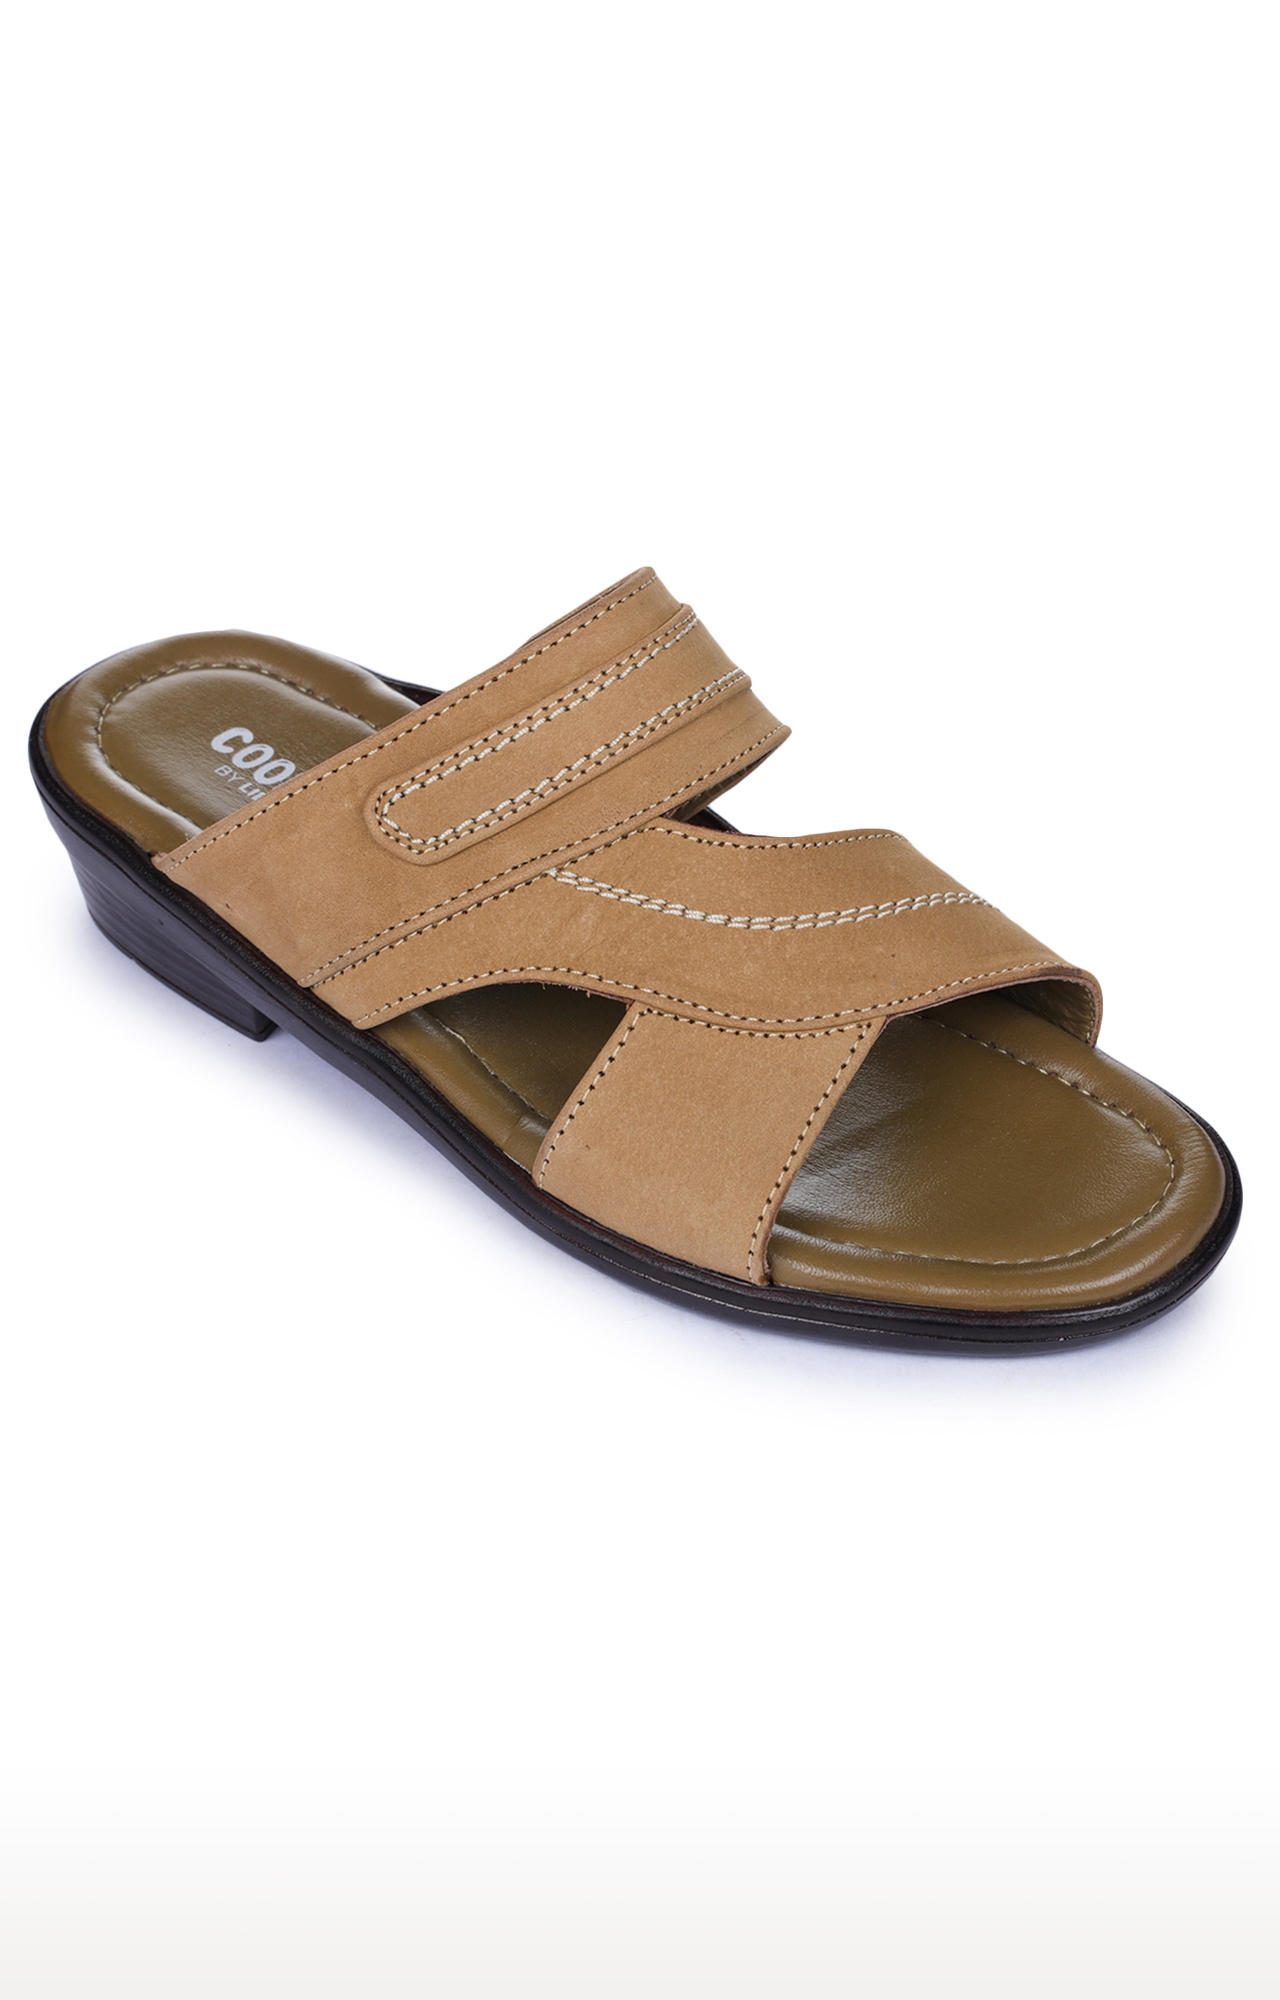 Liberty | Coolers by Liberty Brown Sandals